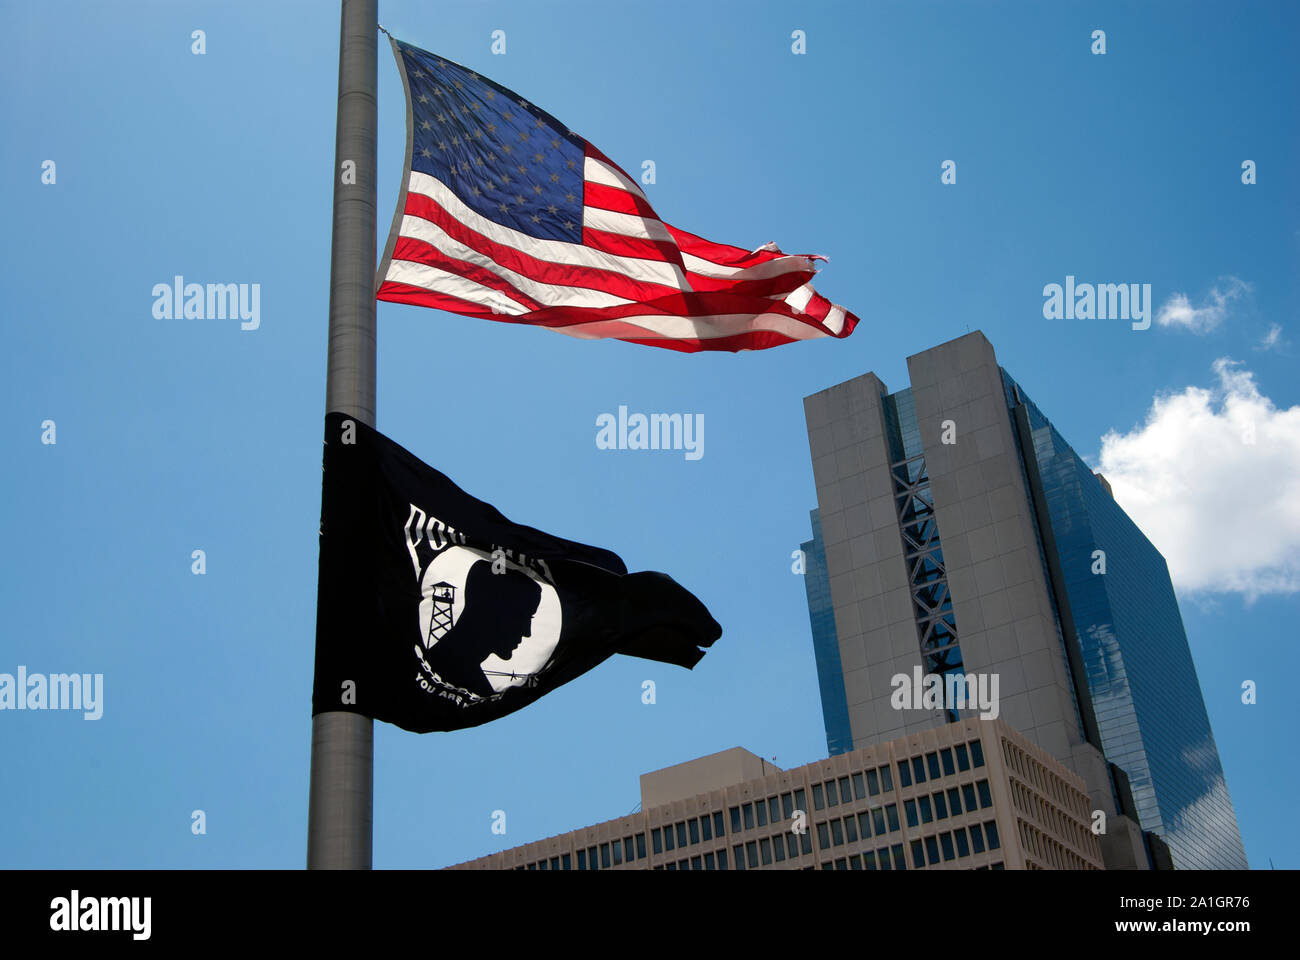 American and POW/MIA flags raised in Downtown Miami on Flagler street in recognition of POW day (Sep 20th) Stock Photo